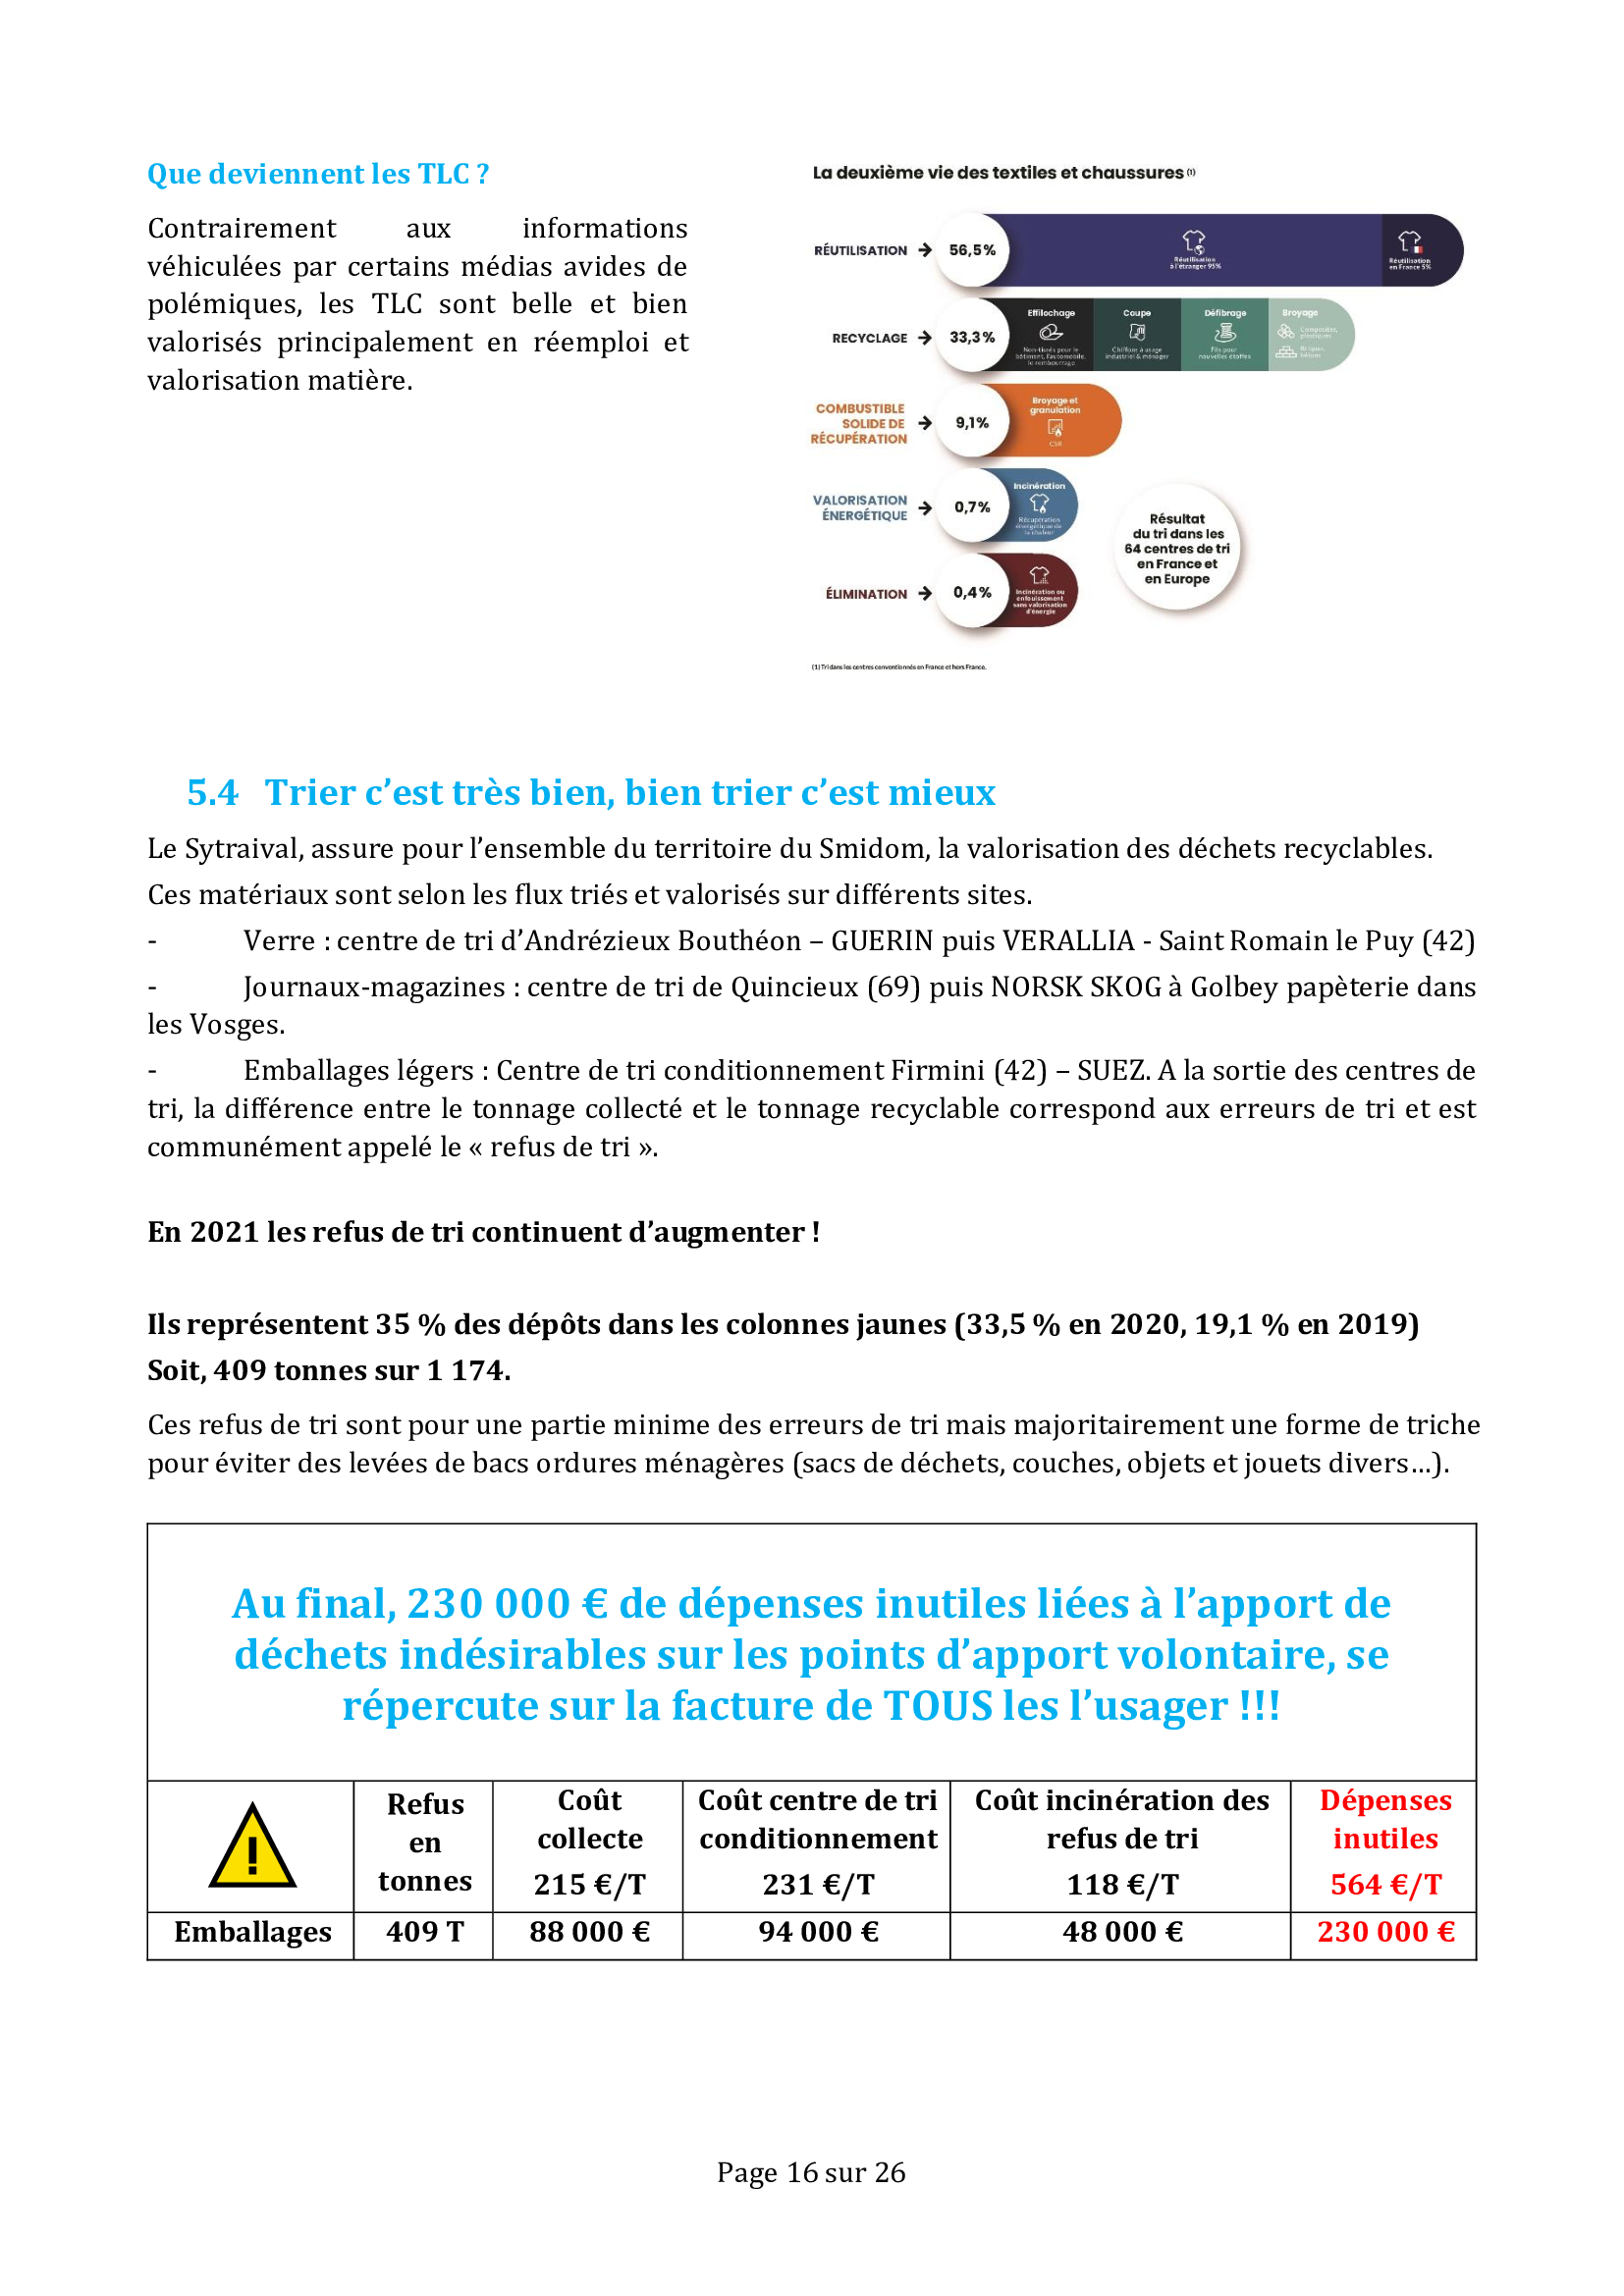 2021 - Rapport annuel - page 16.jpg